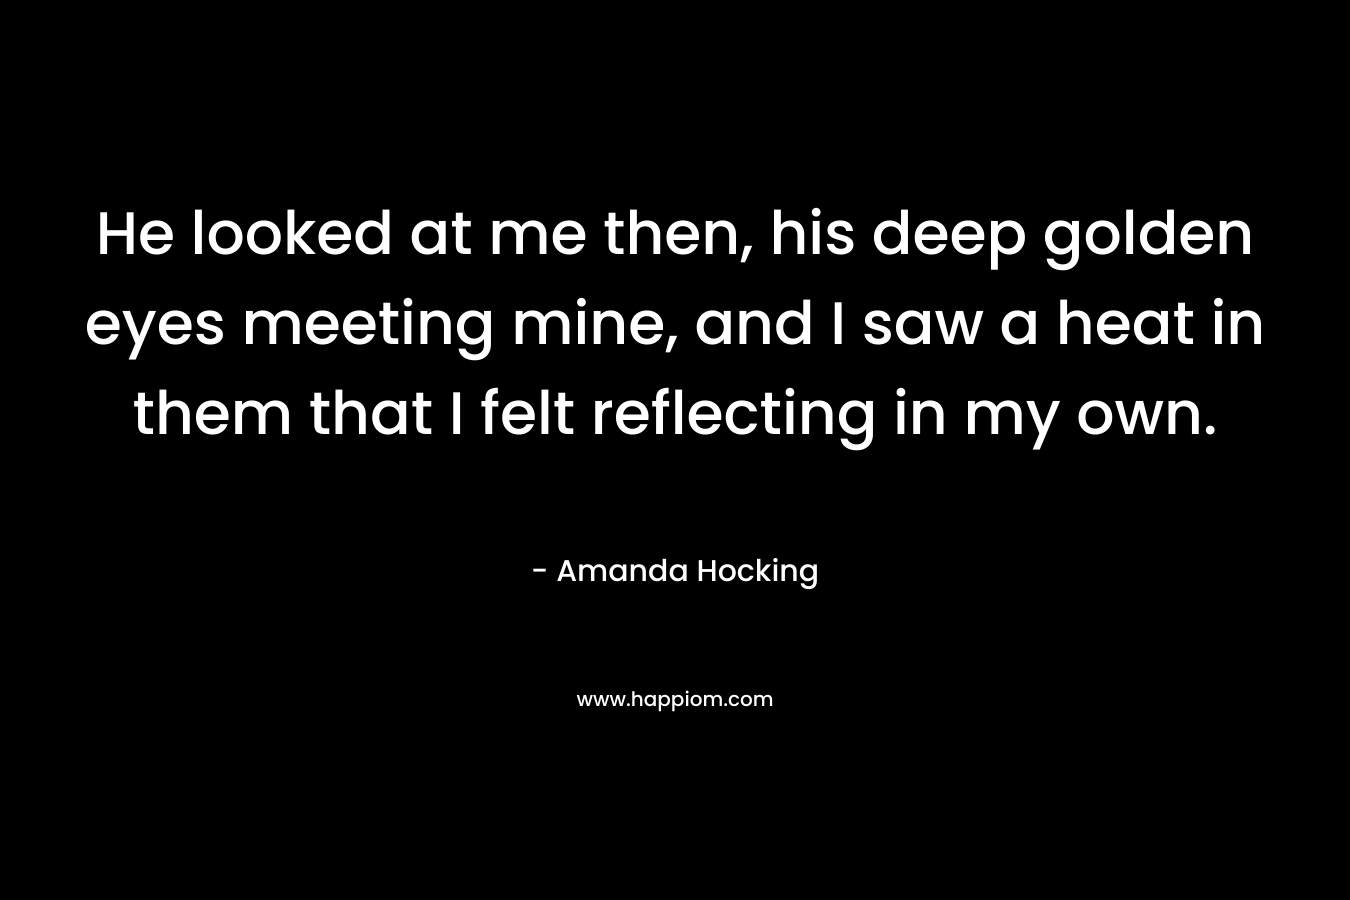 He looked at me then, his deep golden eyes meeting mine, and I saw a heat in them that I felt reflecting in my own. – Amanda Hocking